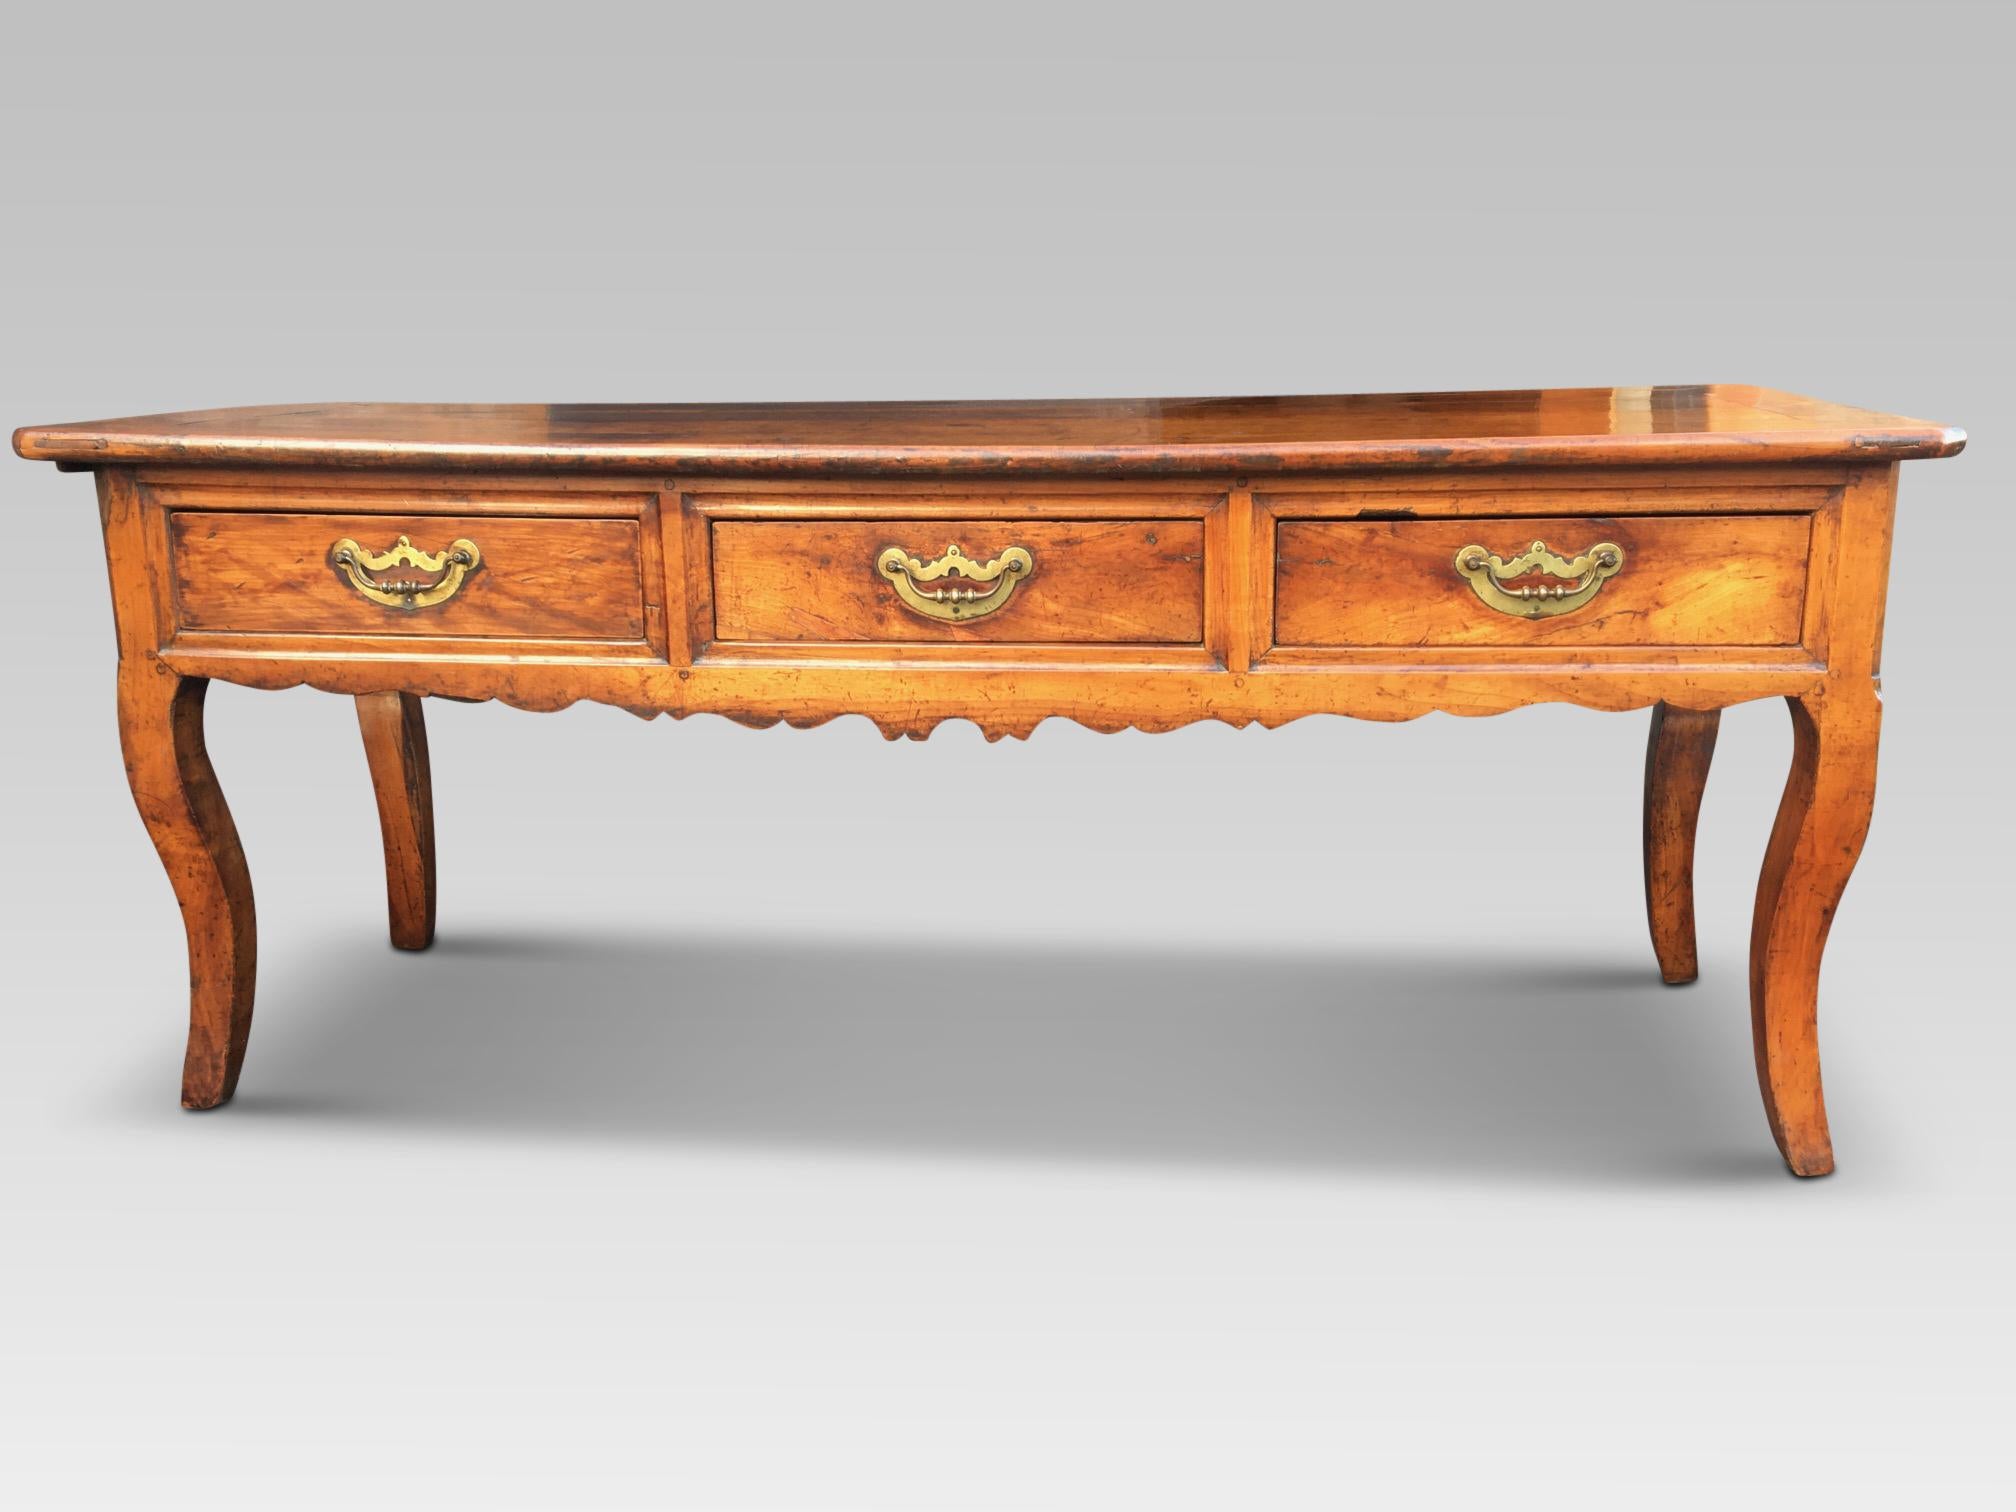 Fine quality serving table / dresser base in cherrywood, circa 1800.
This delightful serving table has loads of character, a mellow color and retains its original finish.
It stands on substantial cabriole legs with smoothly running drawers and